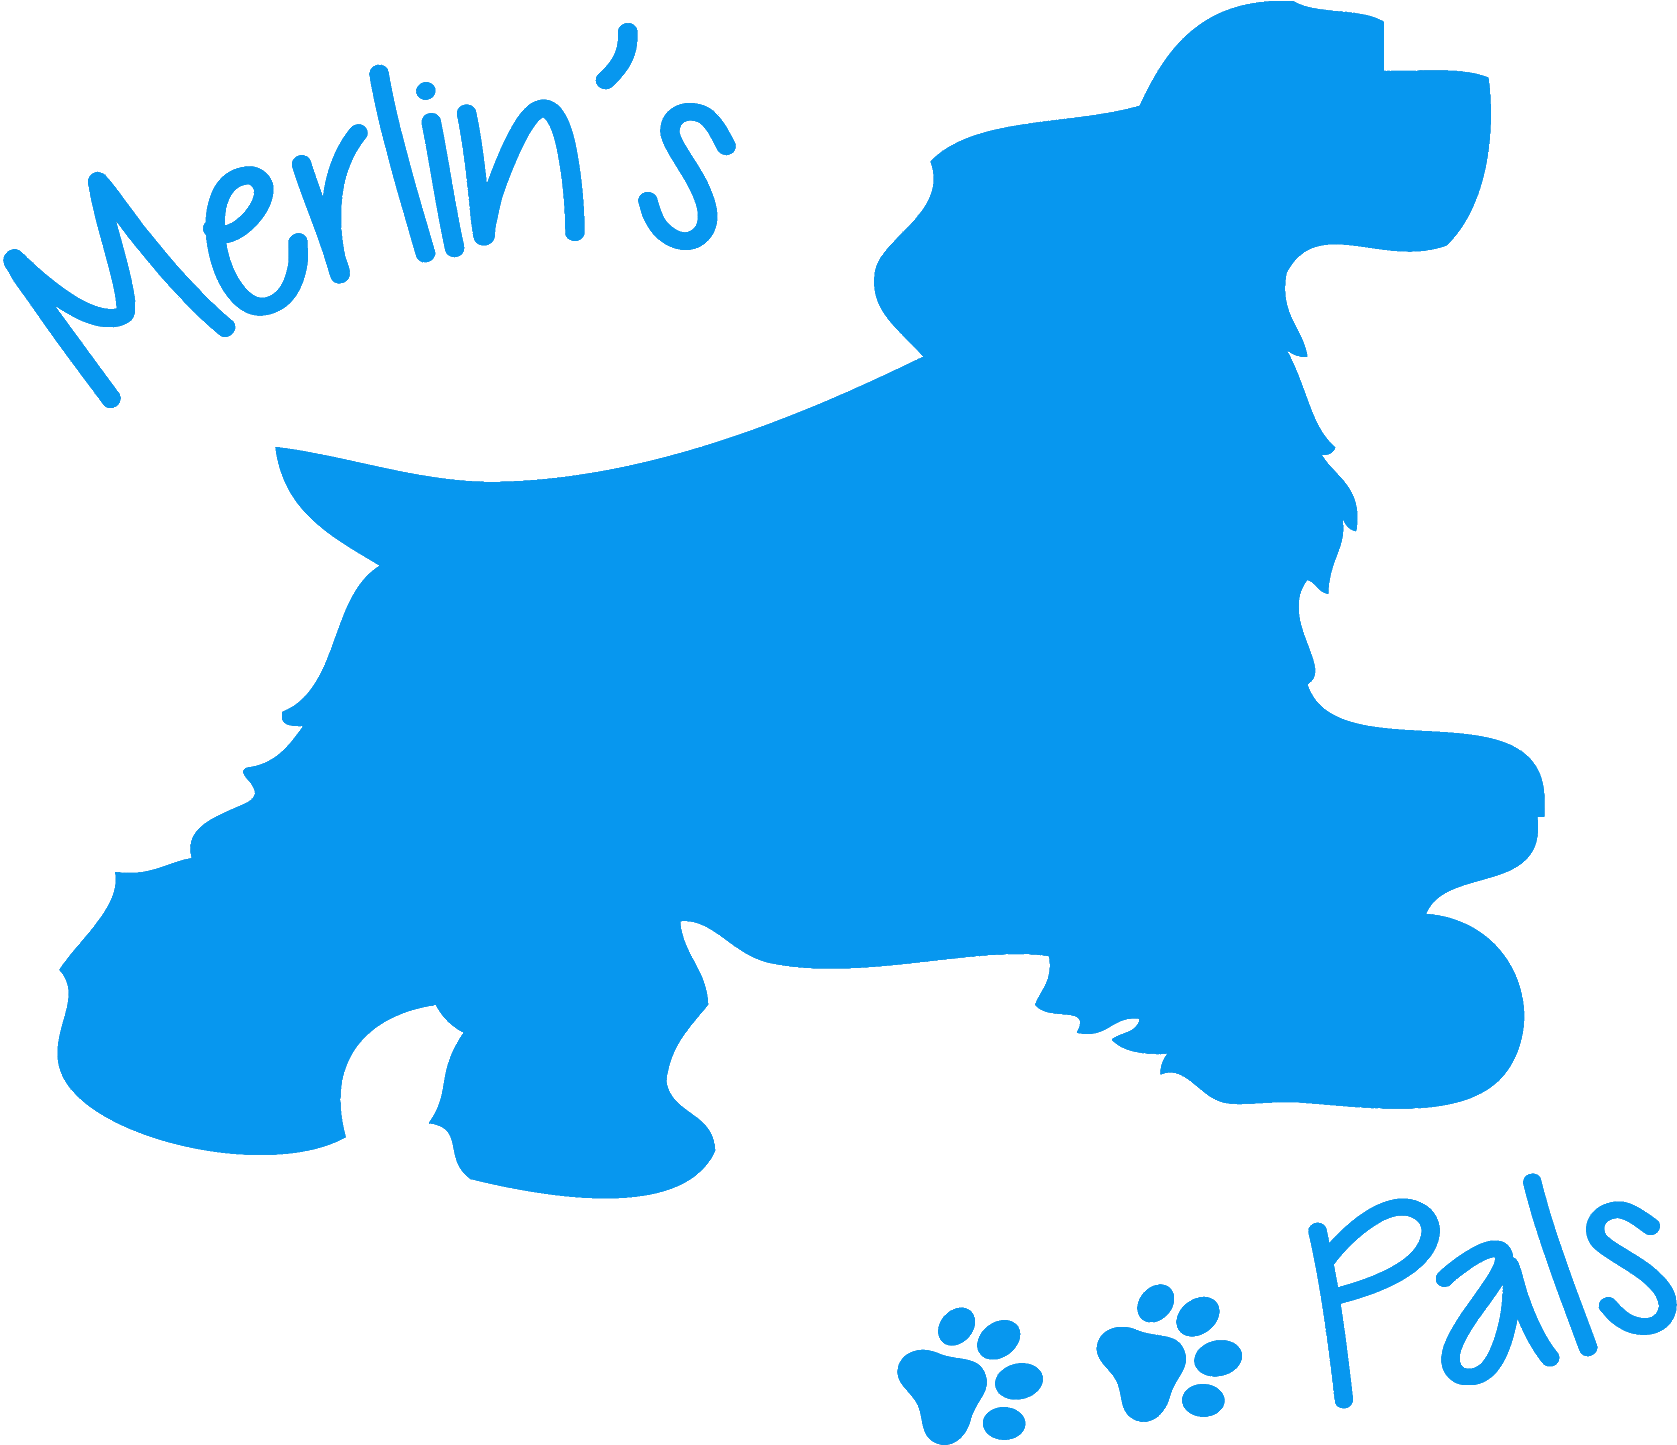 Merlin's Pals/dog Walking And Pet Care Services - Dog Walking (2048x1638)